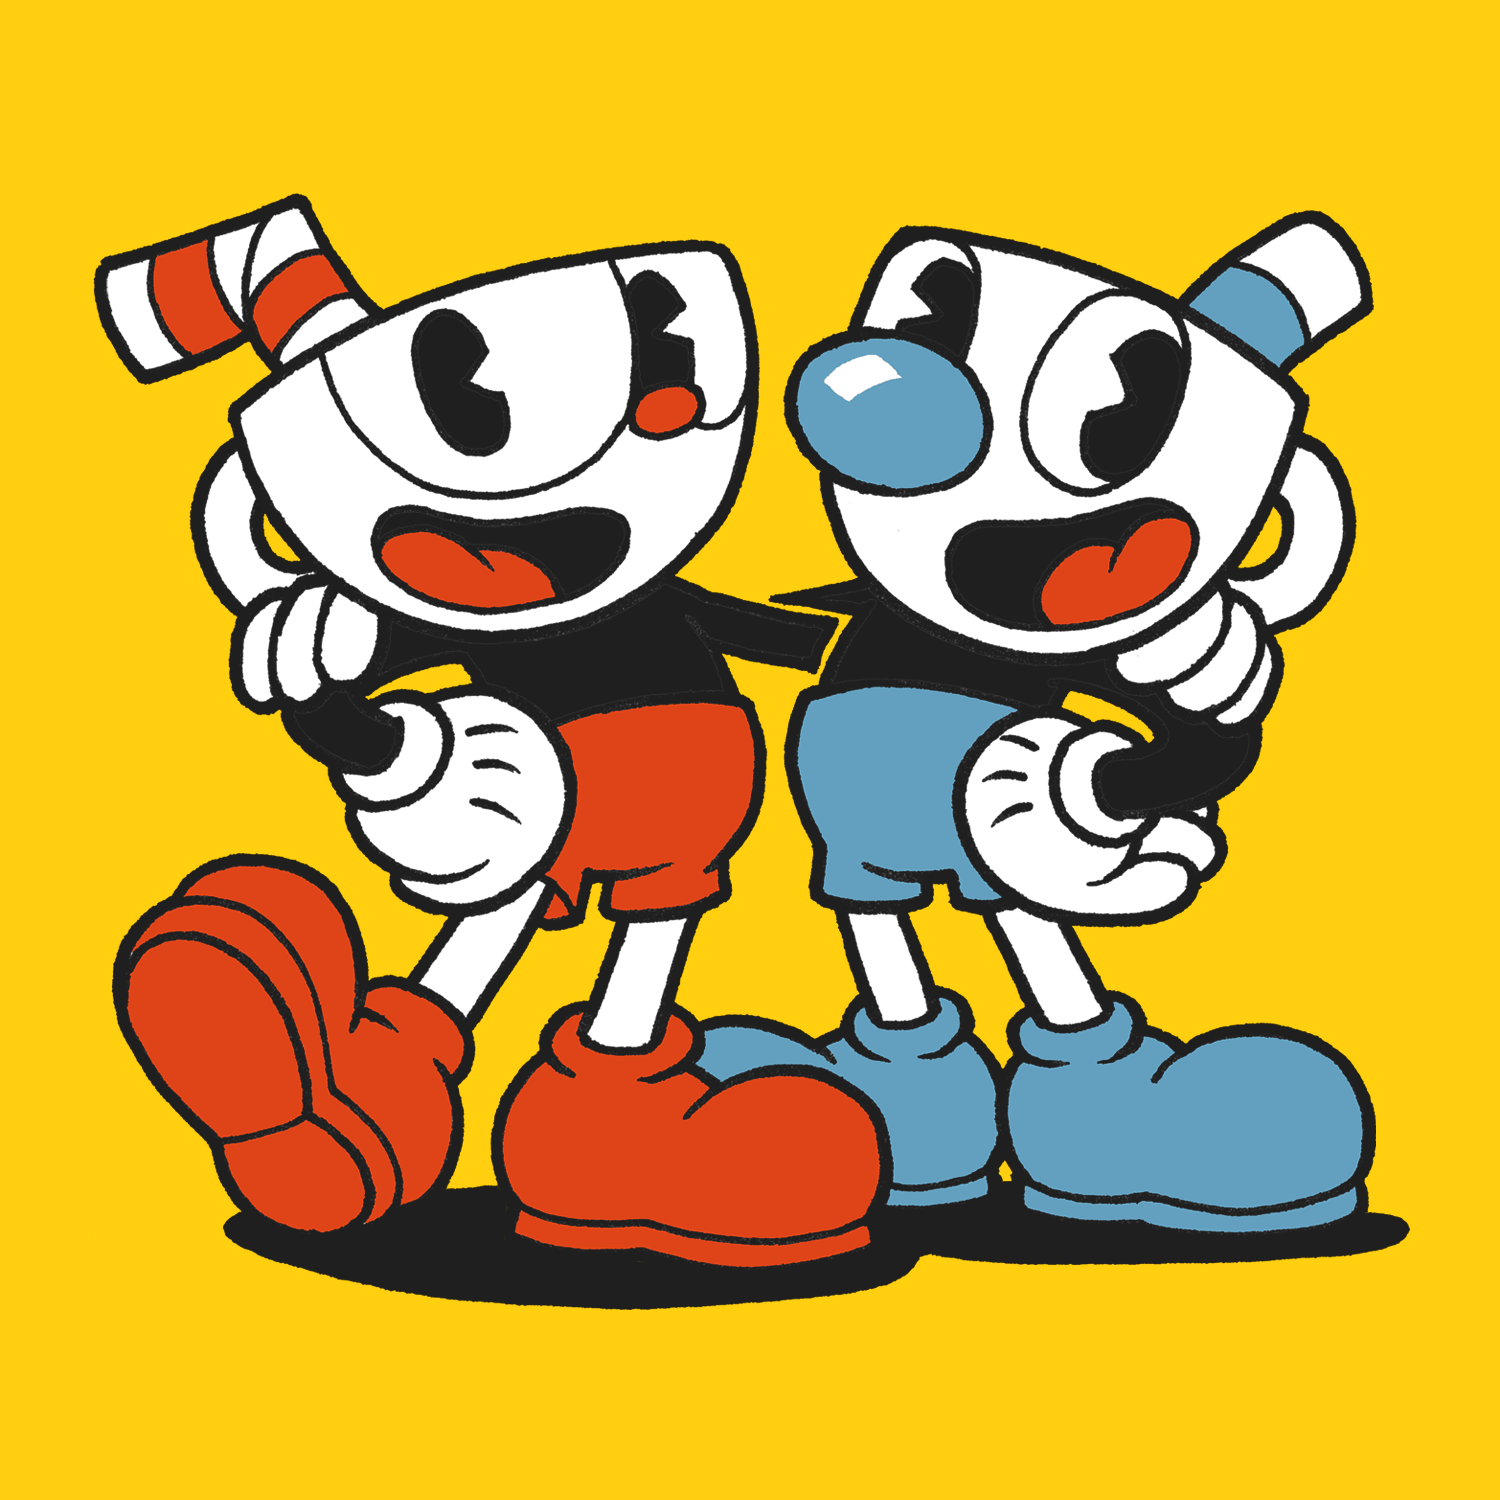 Steam Community Market Listings for Cuphead and Mugman